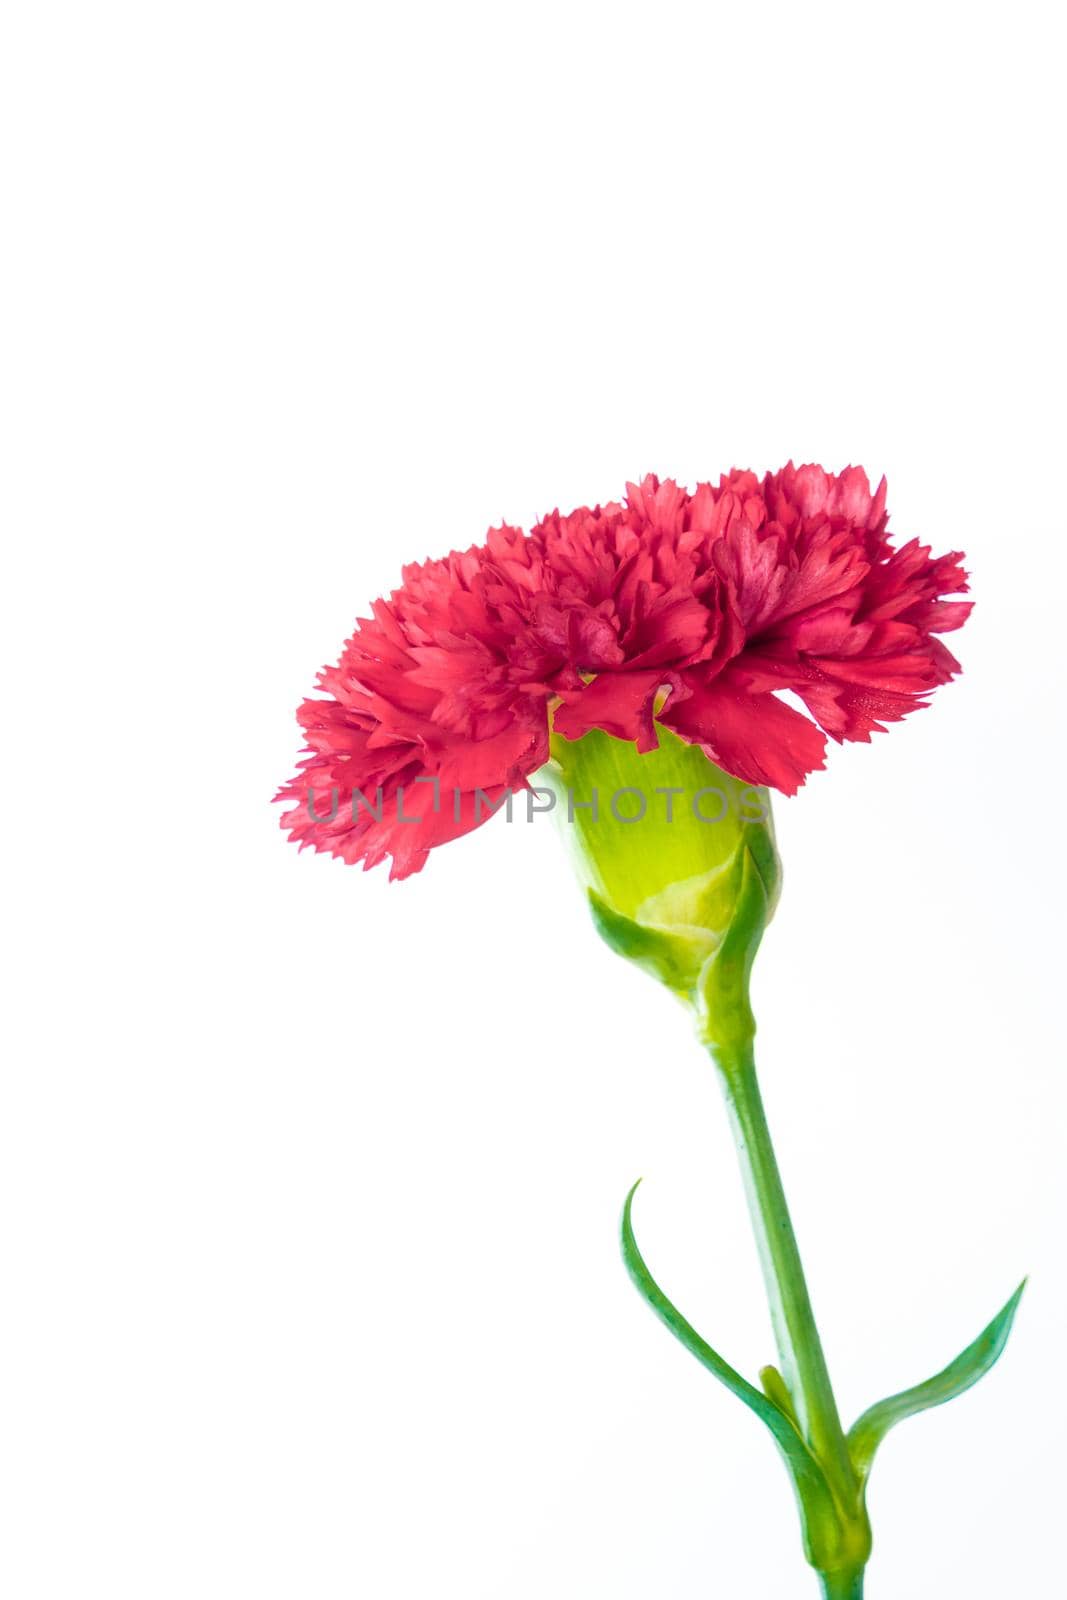 Vivid red carnation isolated on white background by Satakorn